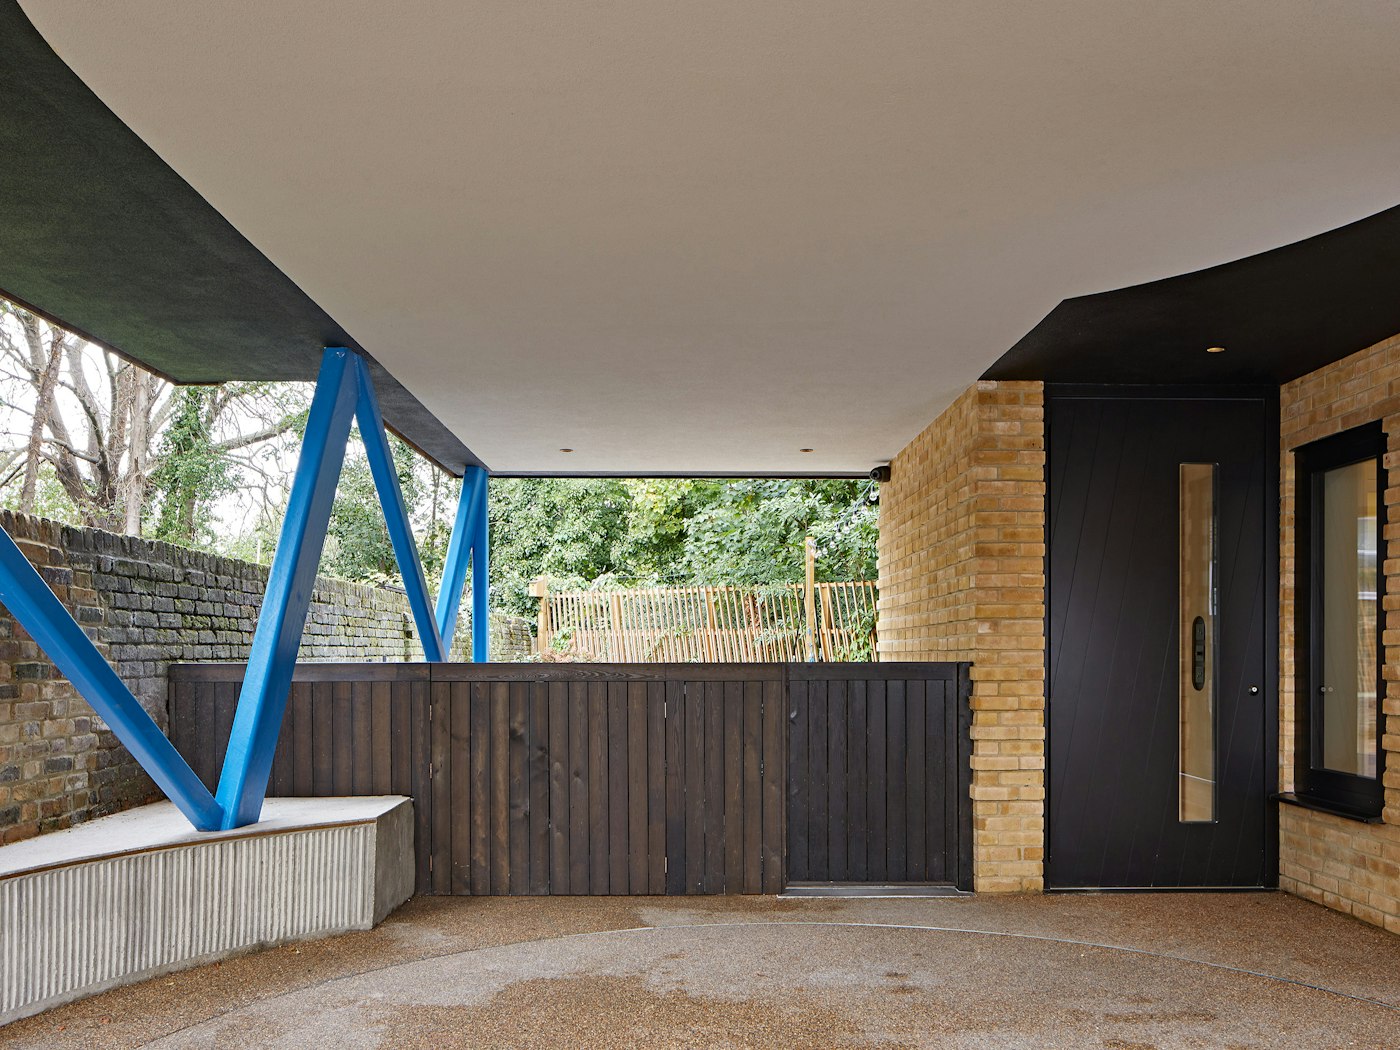 The covered porch space is accented by the attention grabbing blue legs holding the upper level